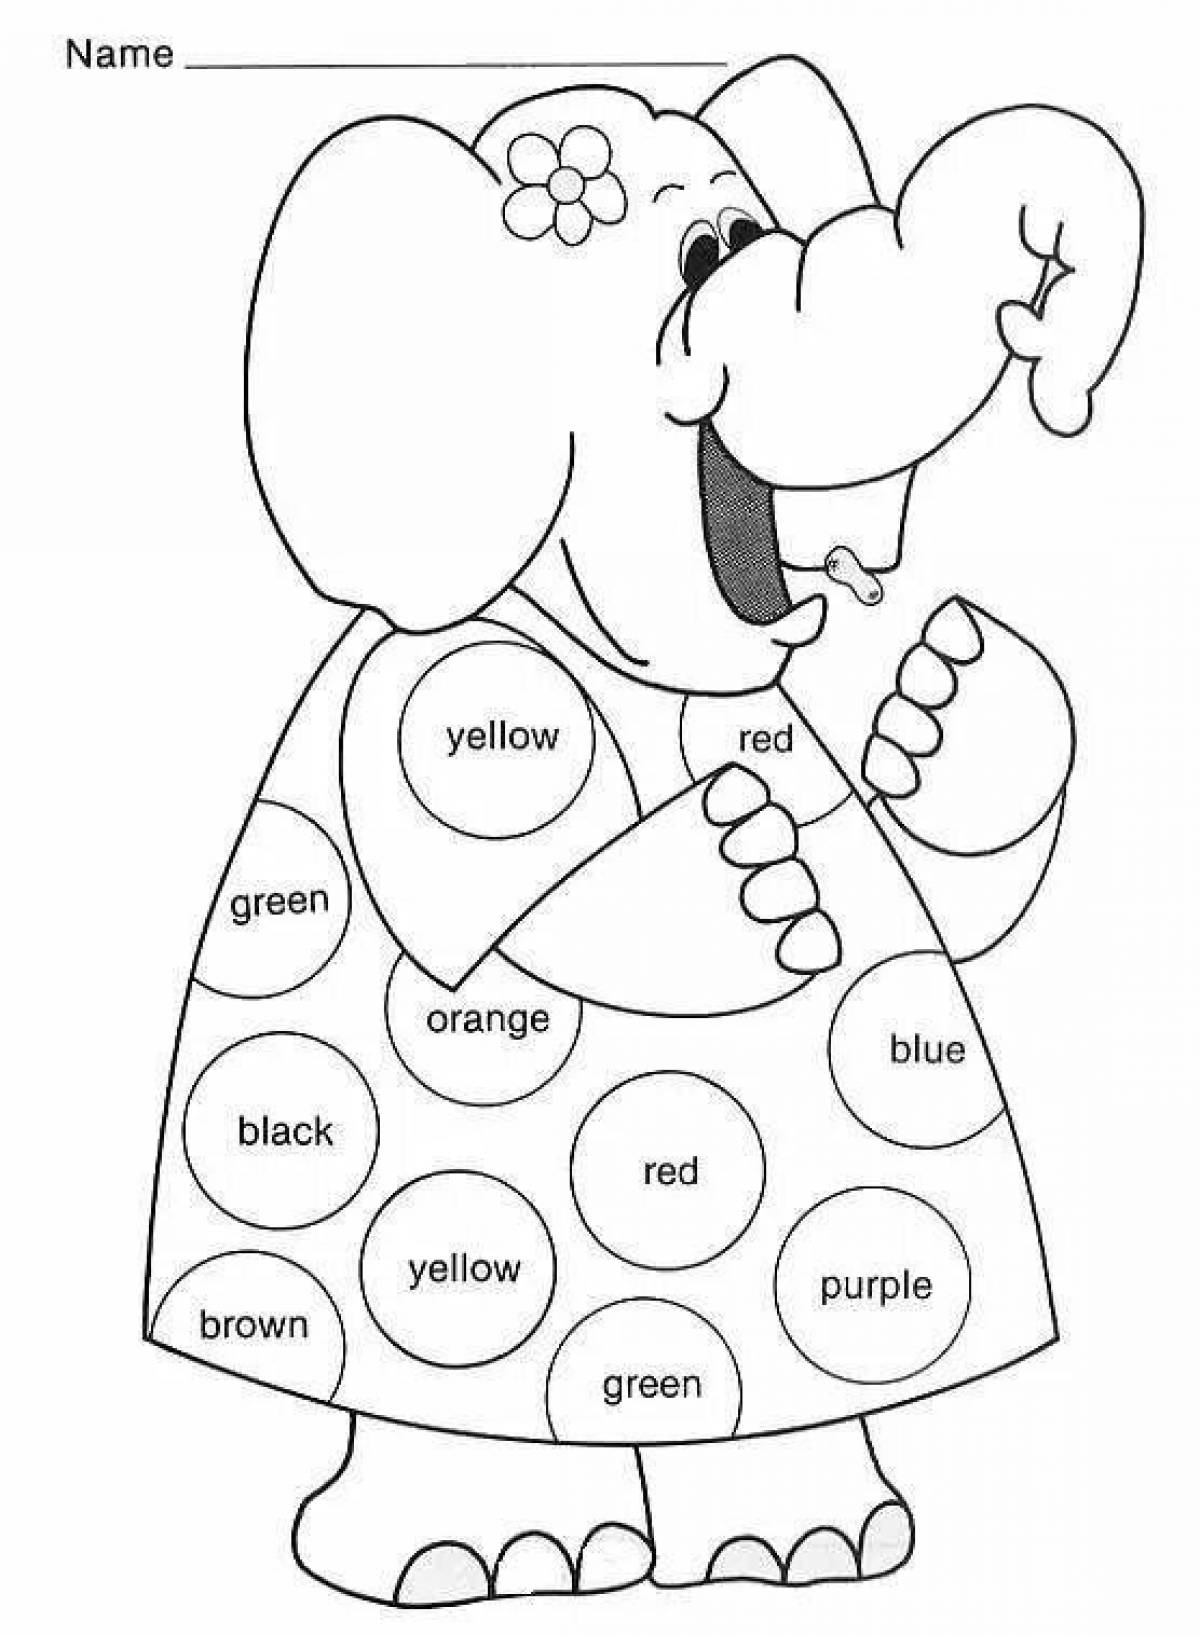 Uplifting hey color coloring page